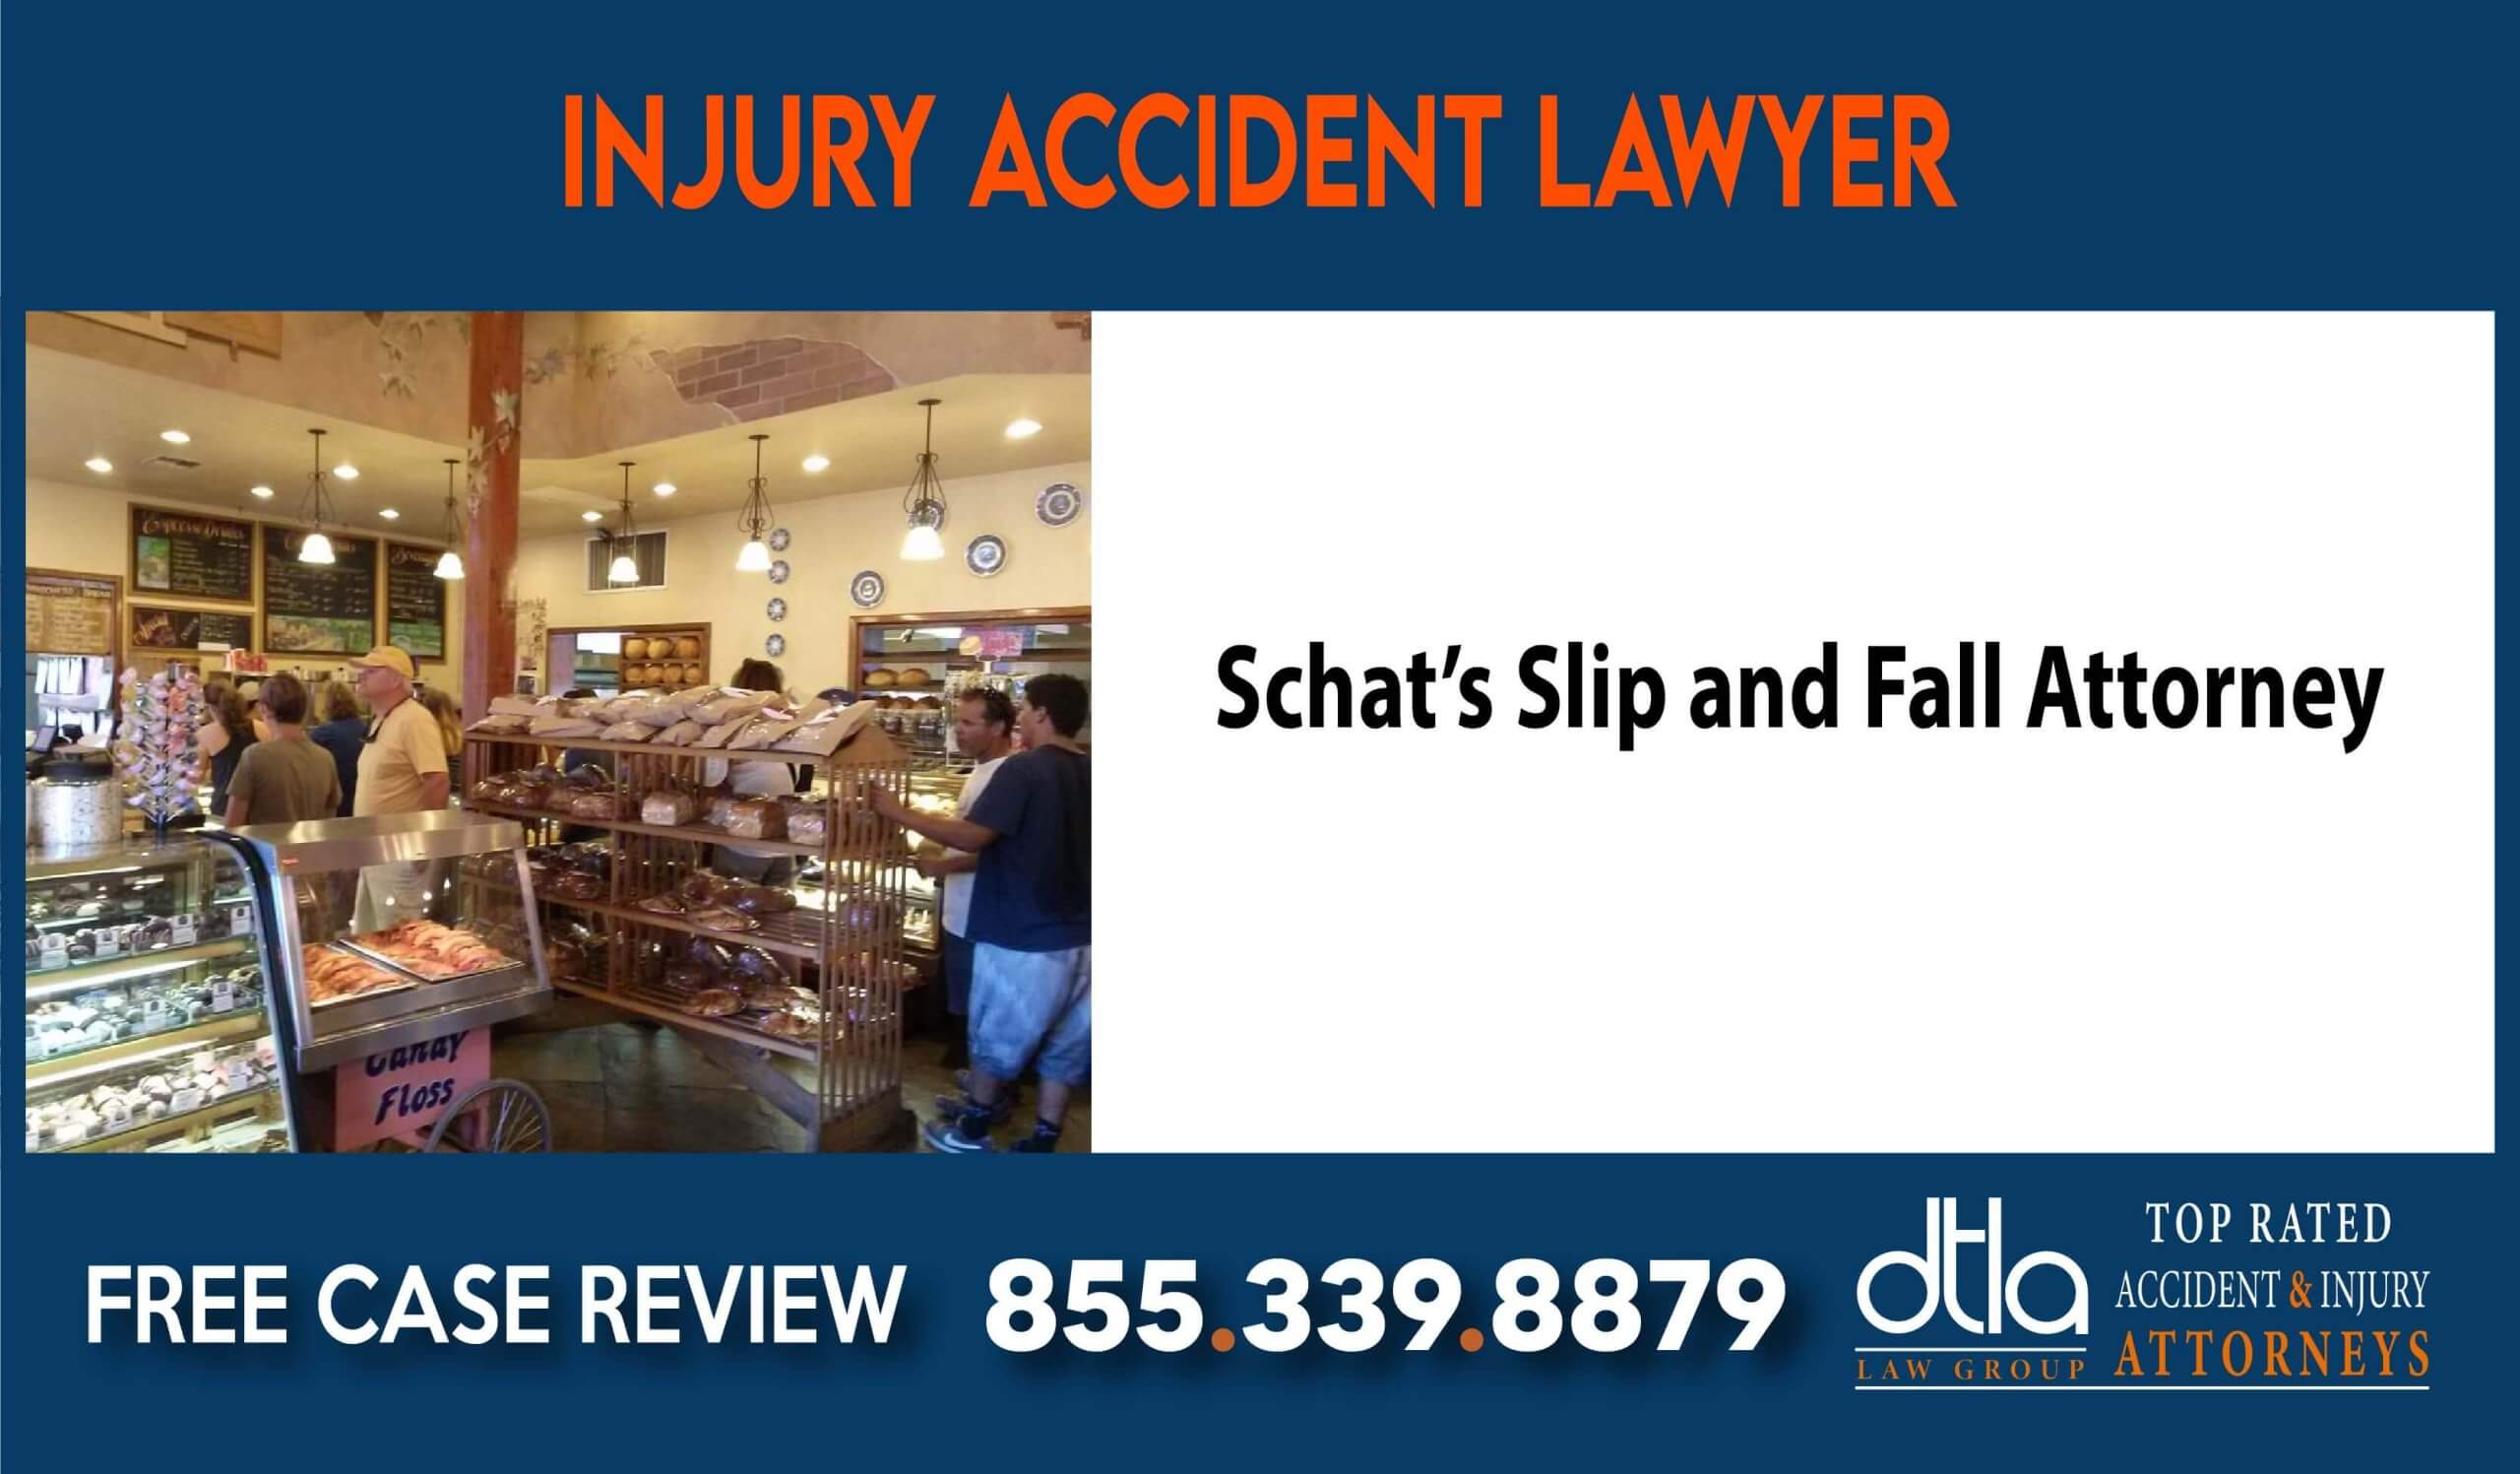 Schats Slip and Fall Attorney lawyer incident liability compensation incident liability